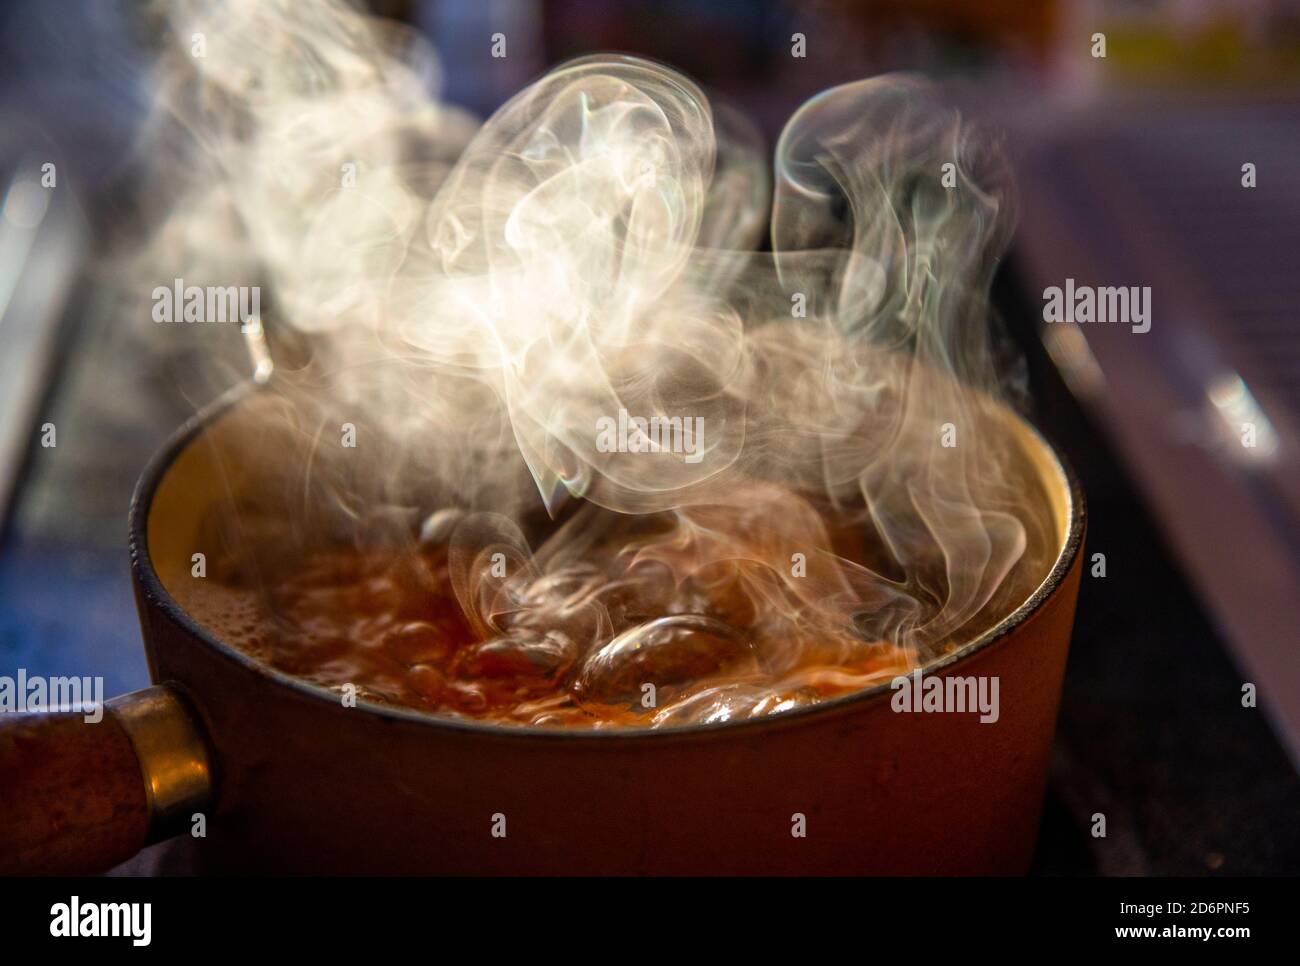 eggs boiling on the stove with steam rising Stock Photo